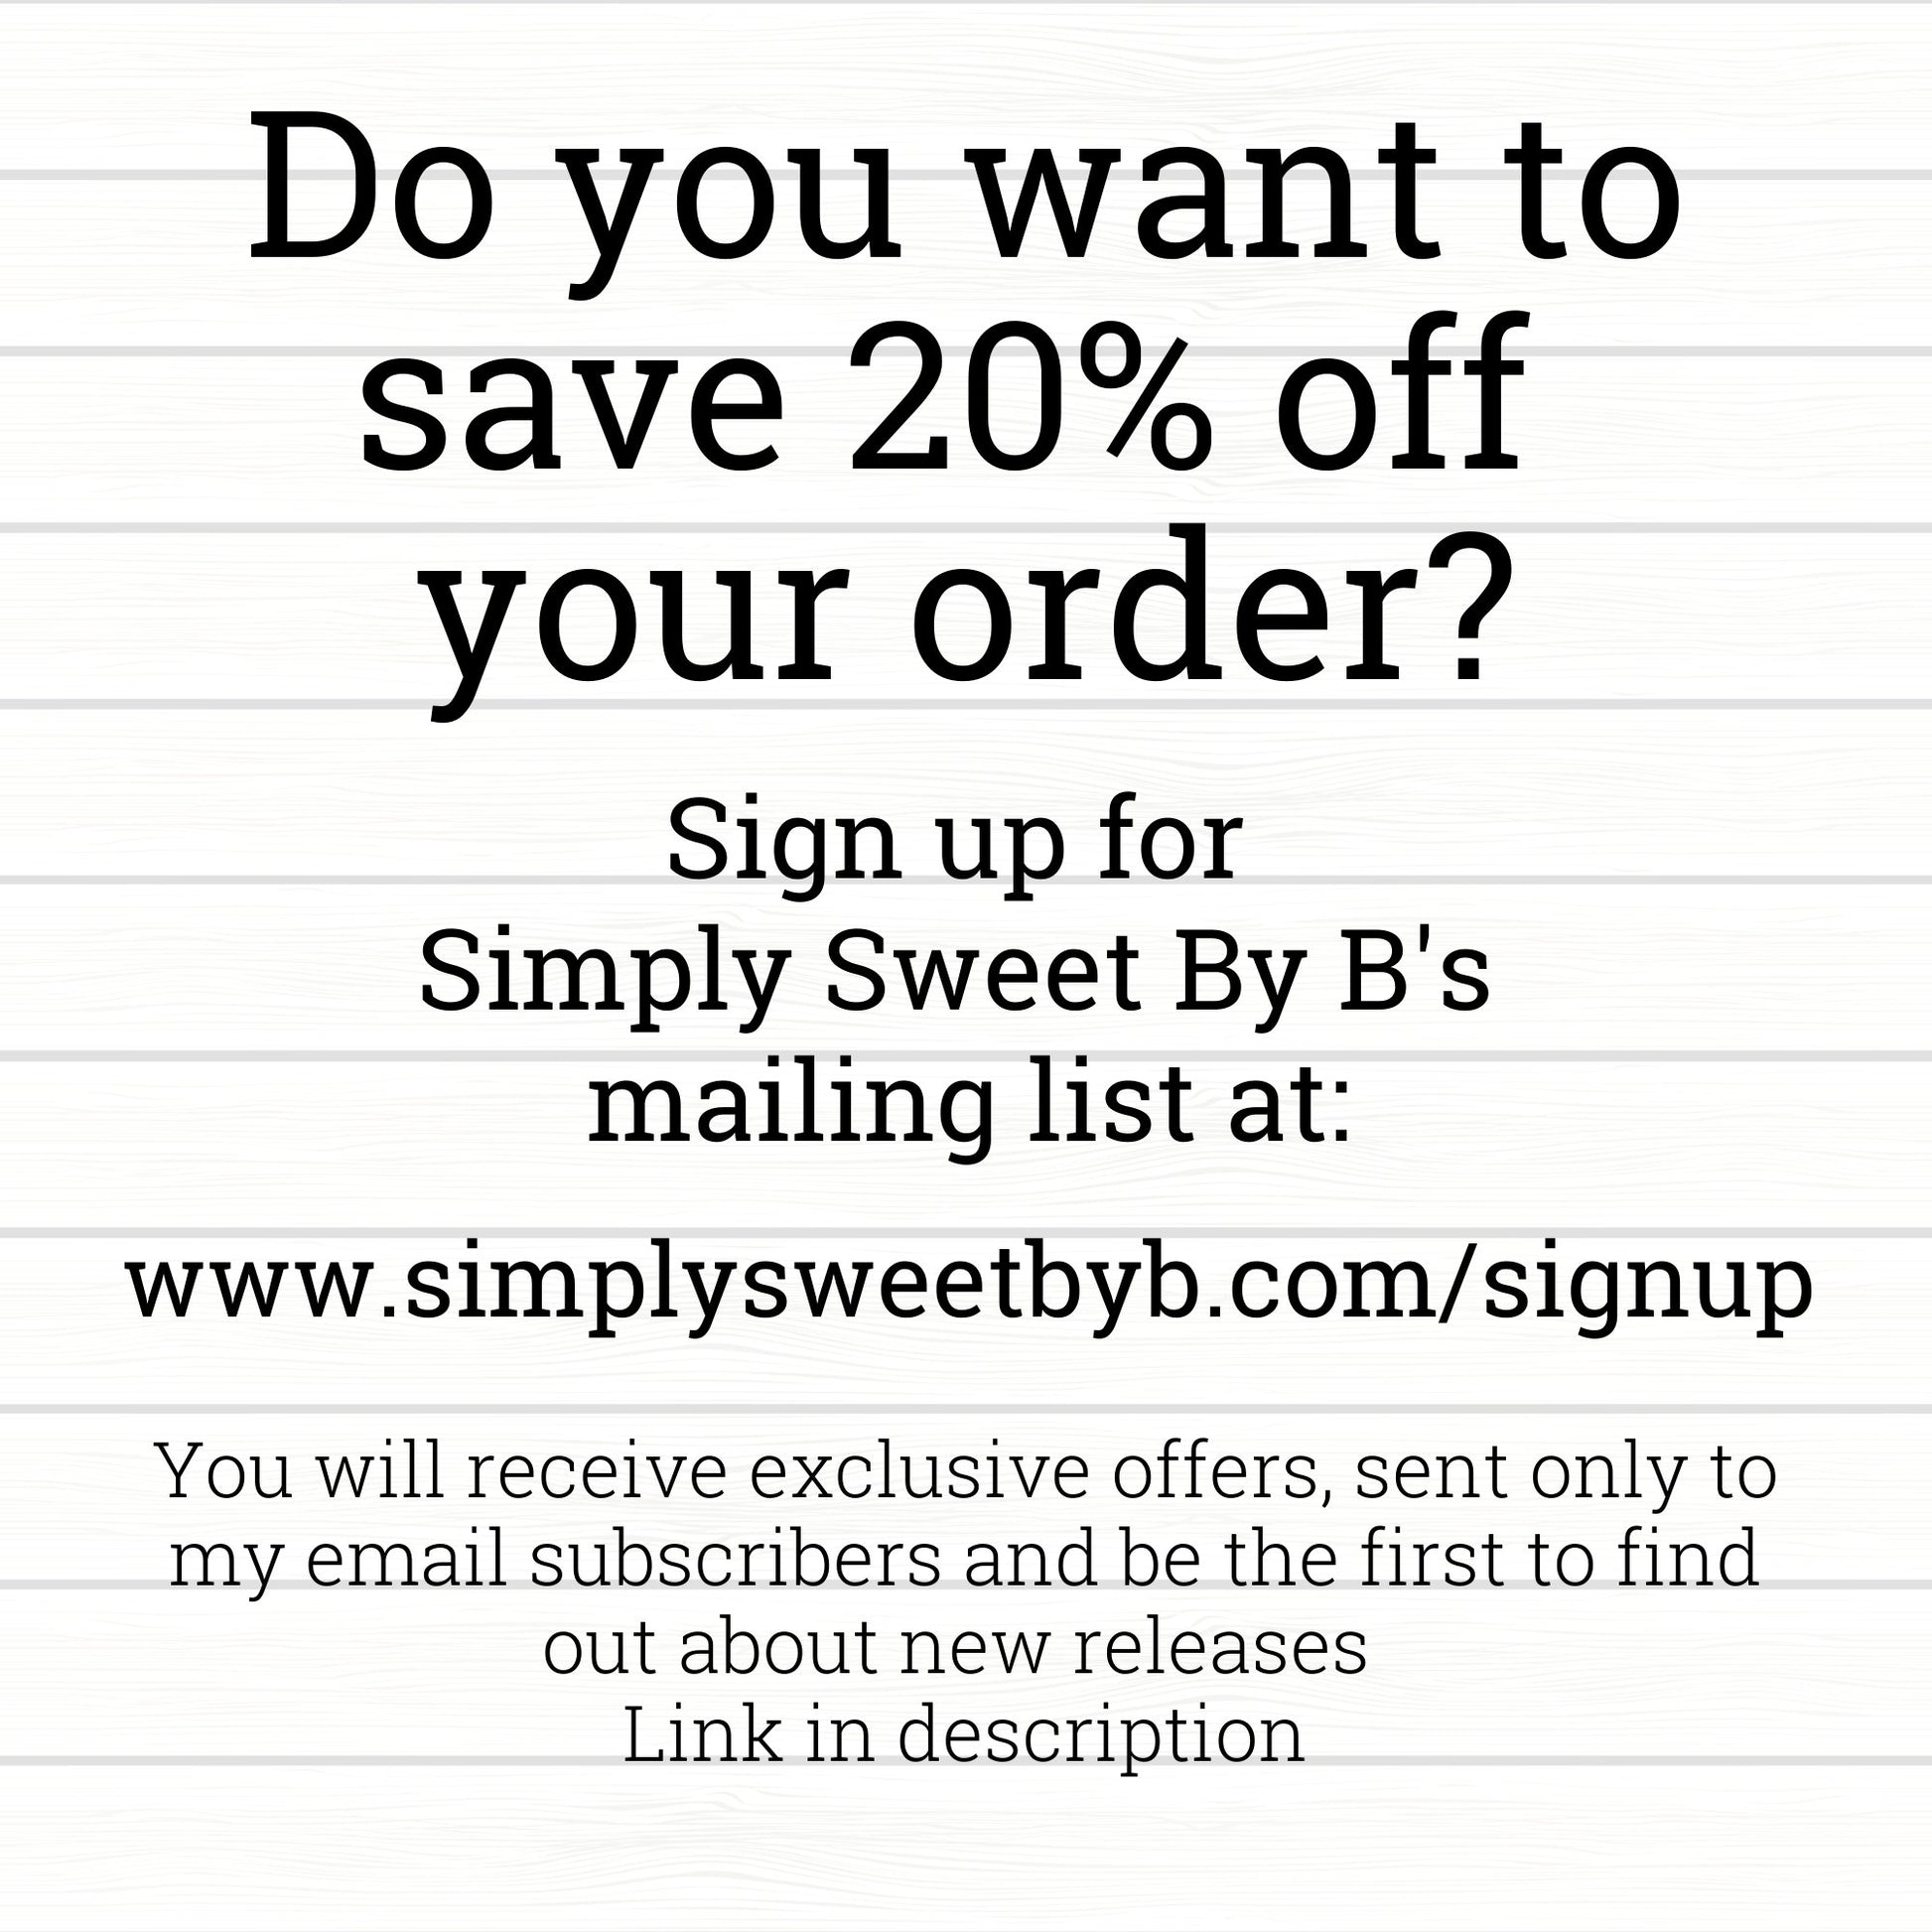 Save 20% now sign up for email list at www.simplysweetbyb.com/signup